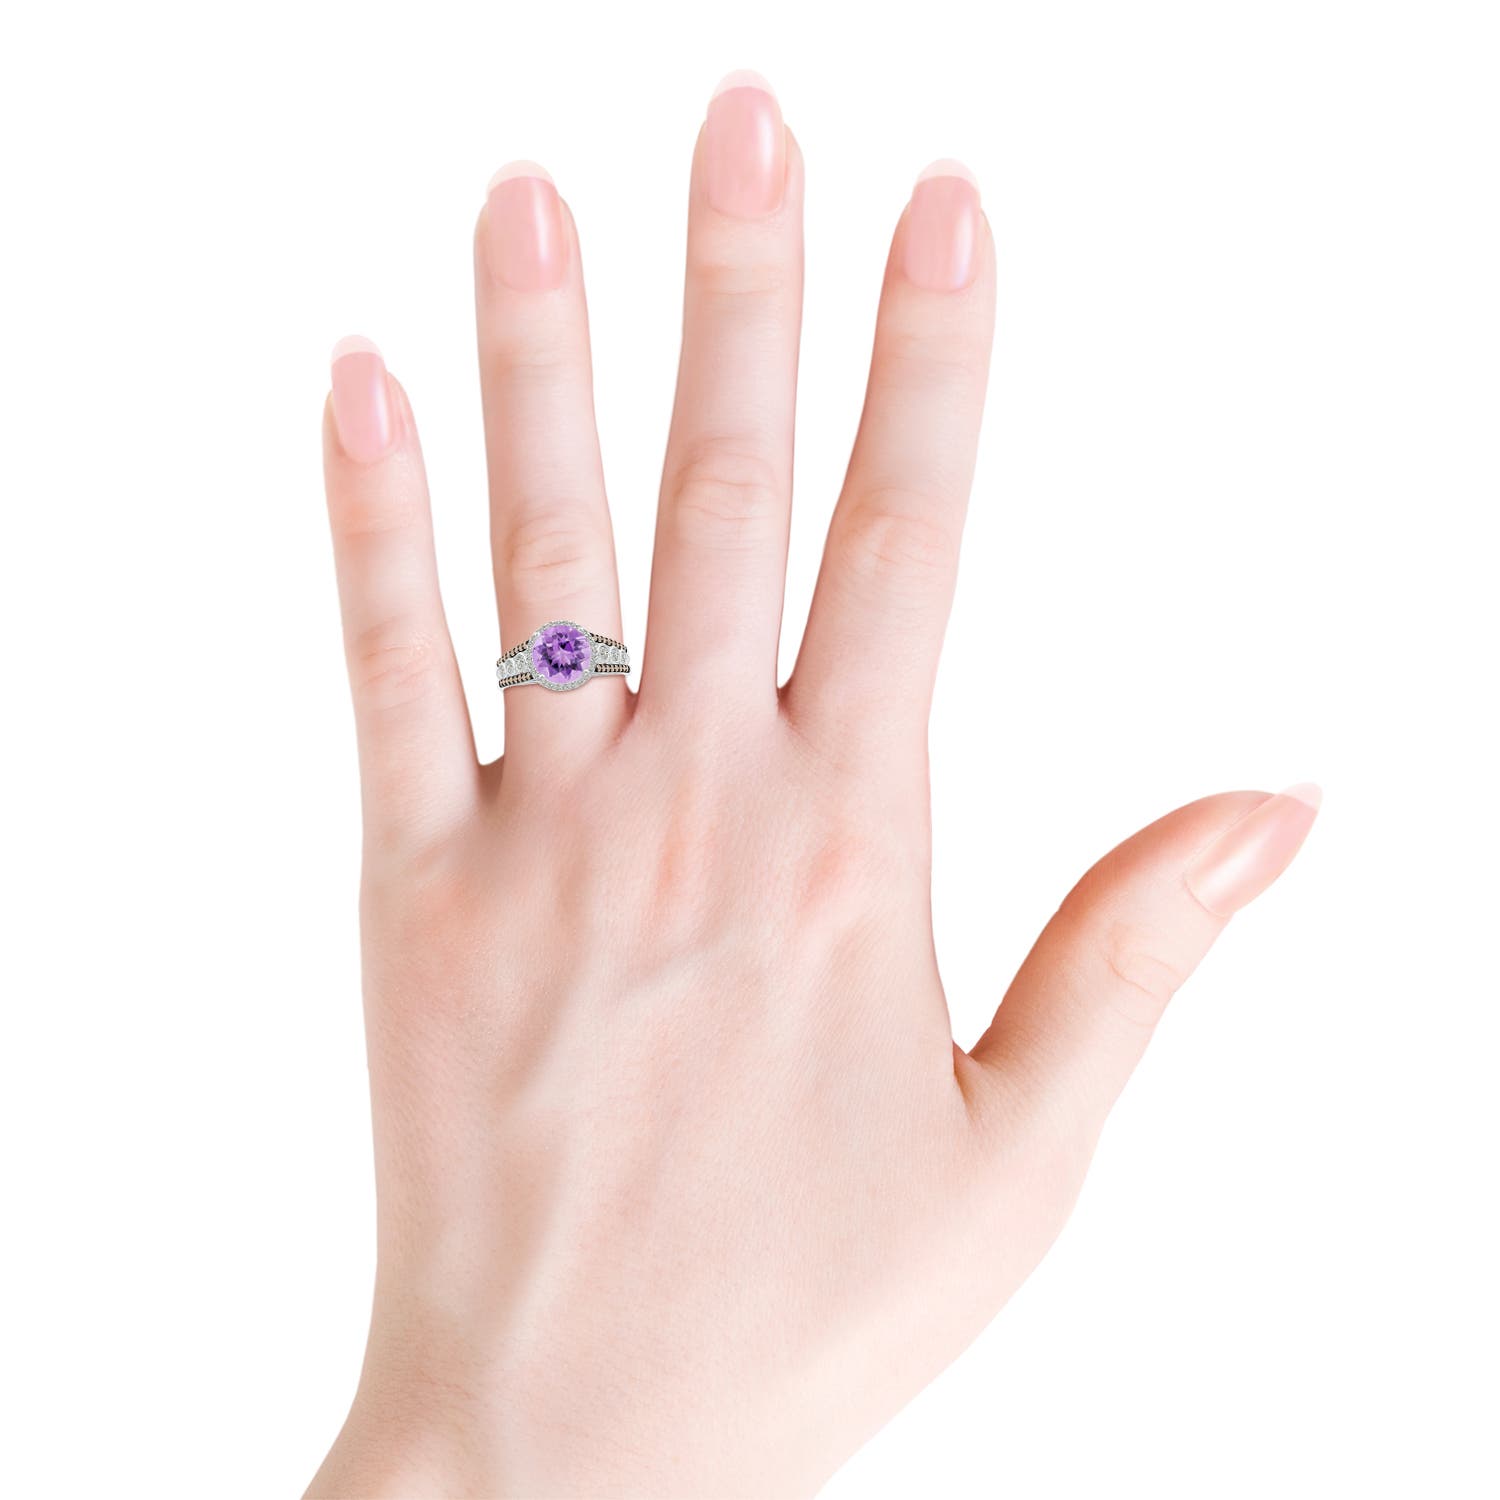 A - Amethyst / 2.11 CT / 14 KT White Gold